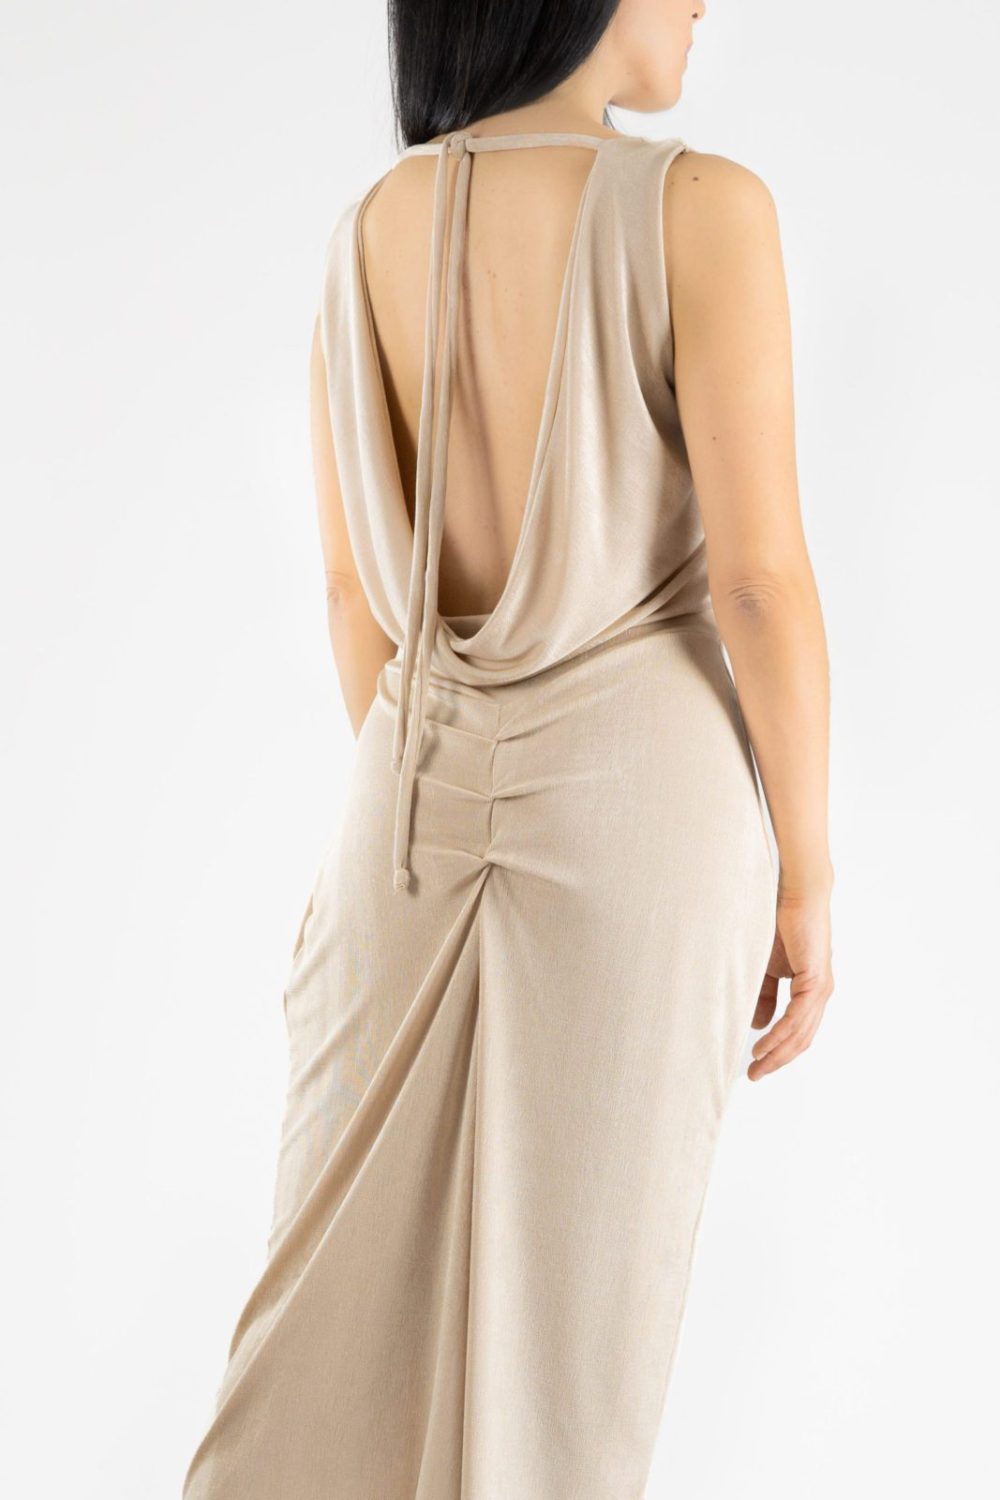 Open draped back tango dress in gold color